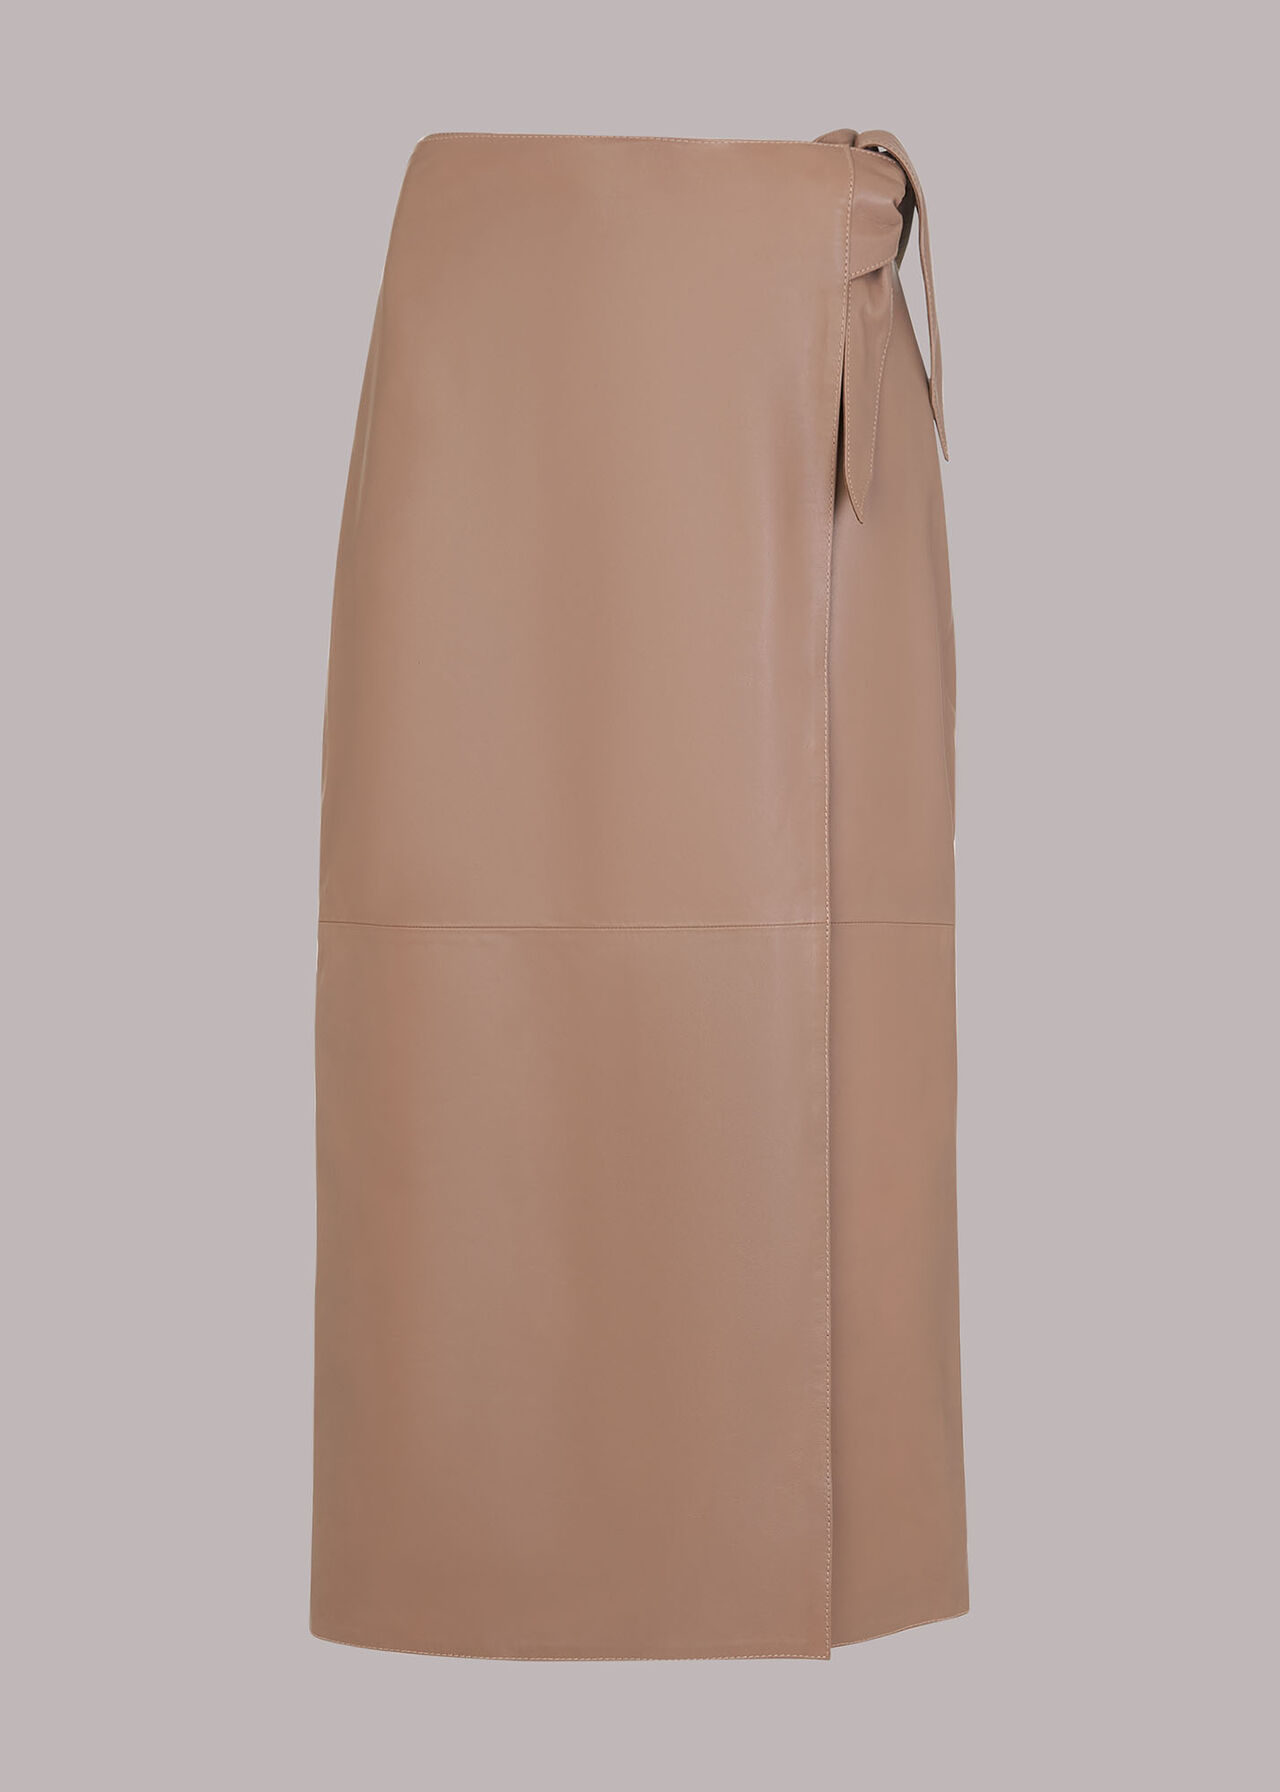 Nude Tie Side Leather Skirt Whistles